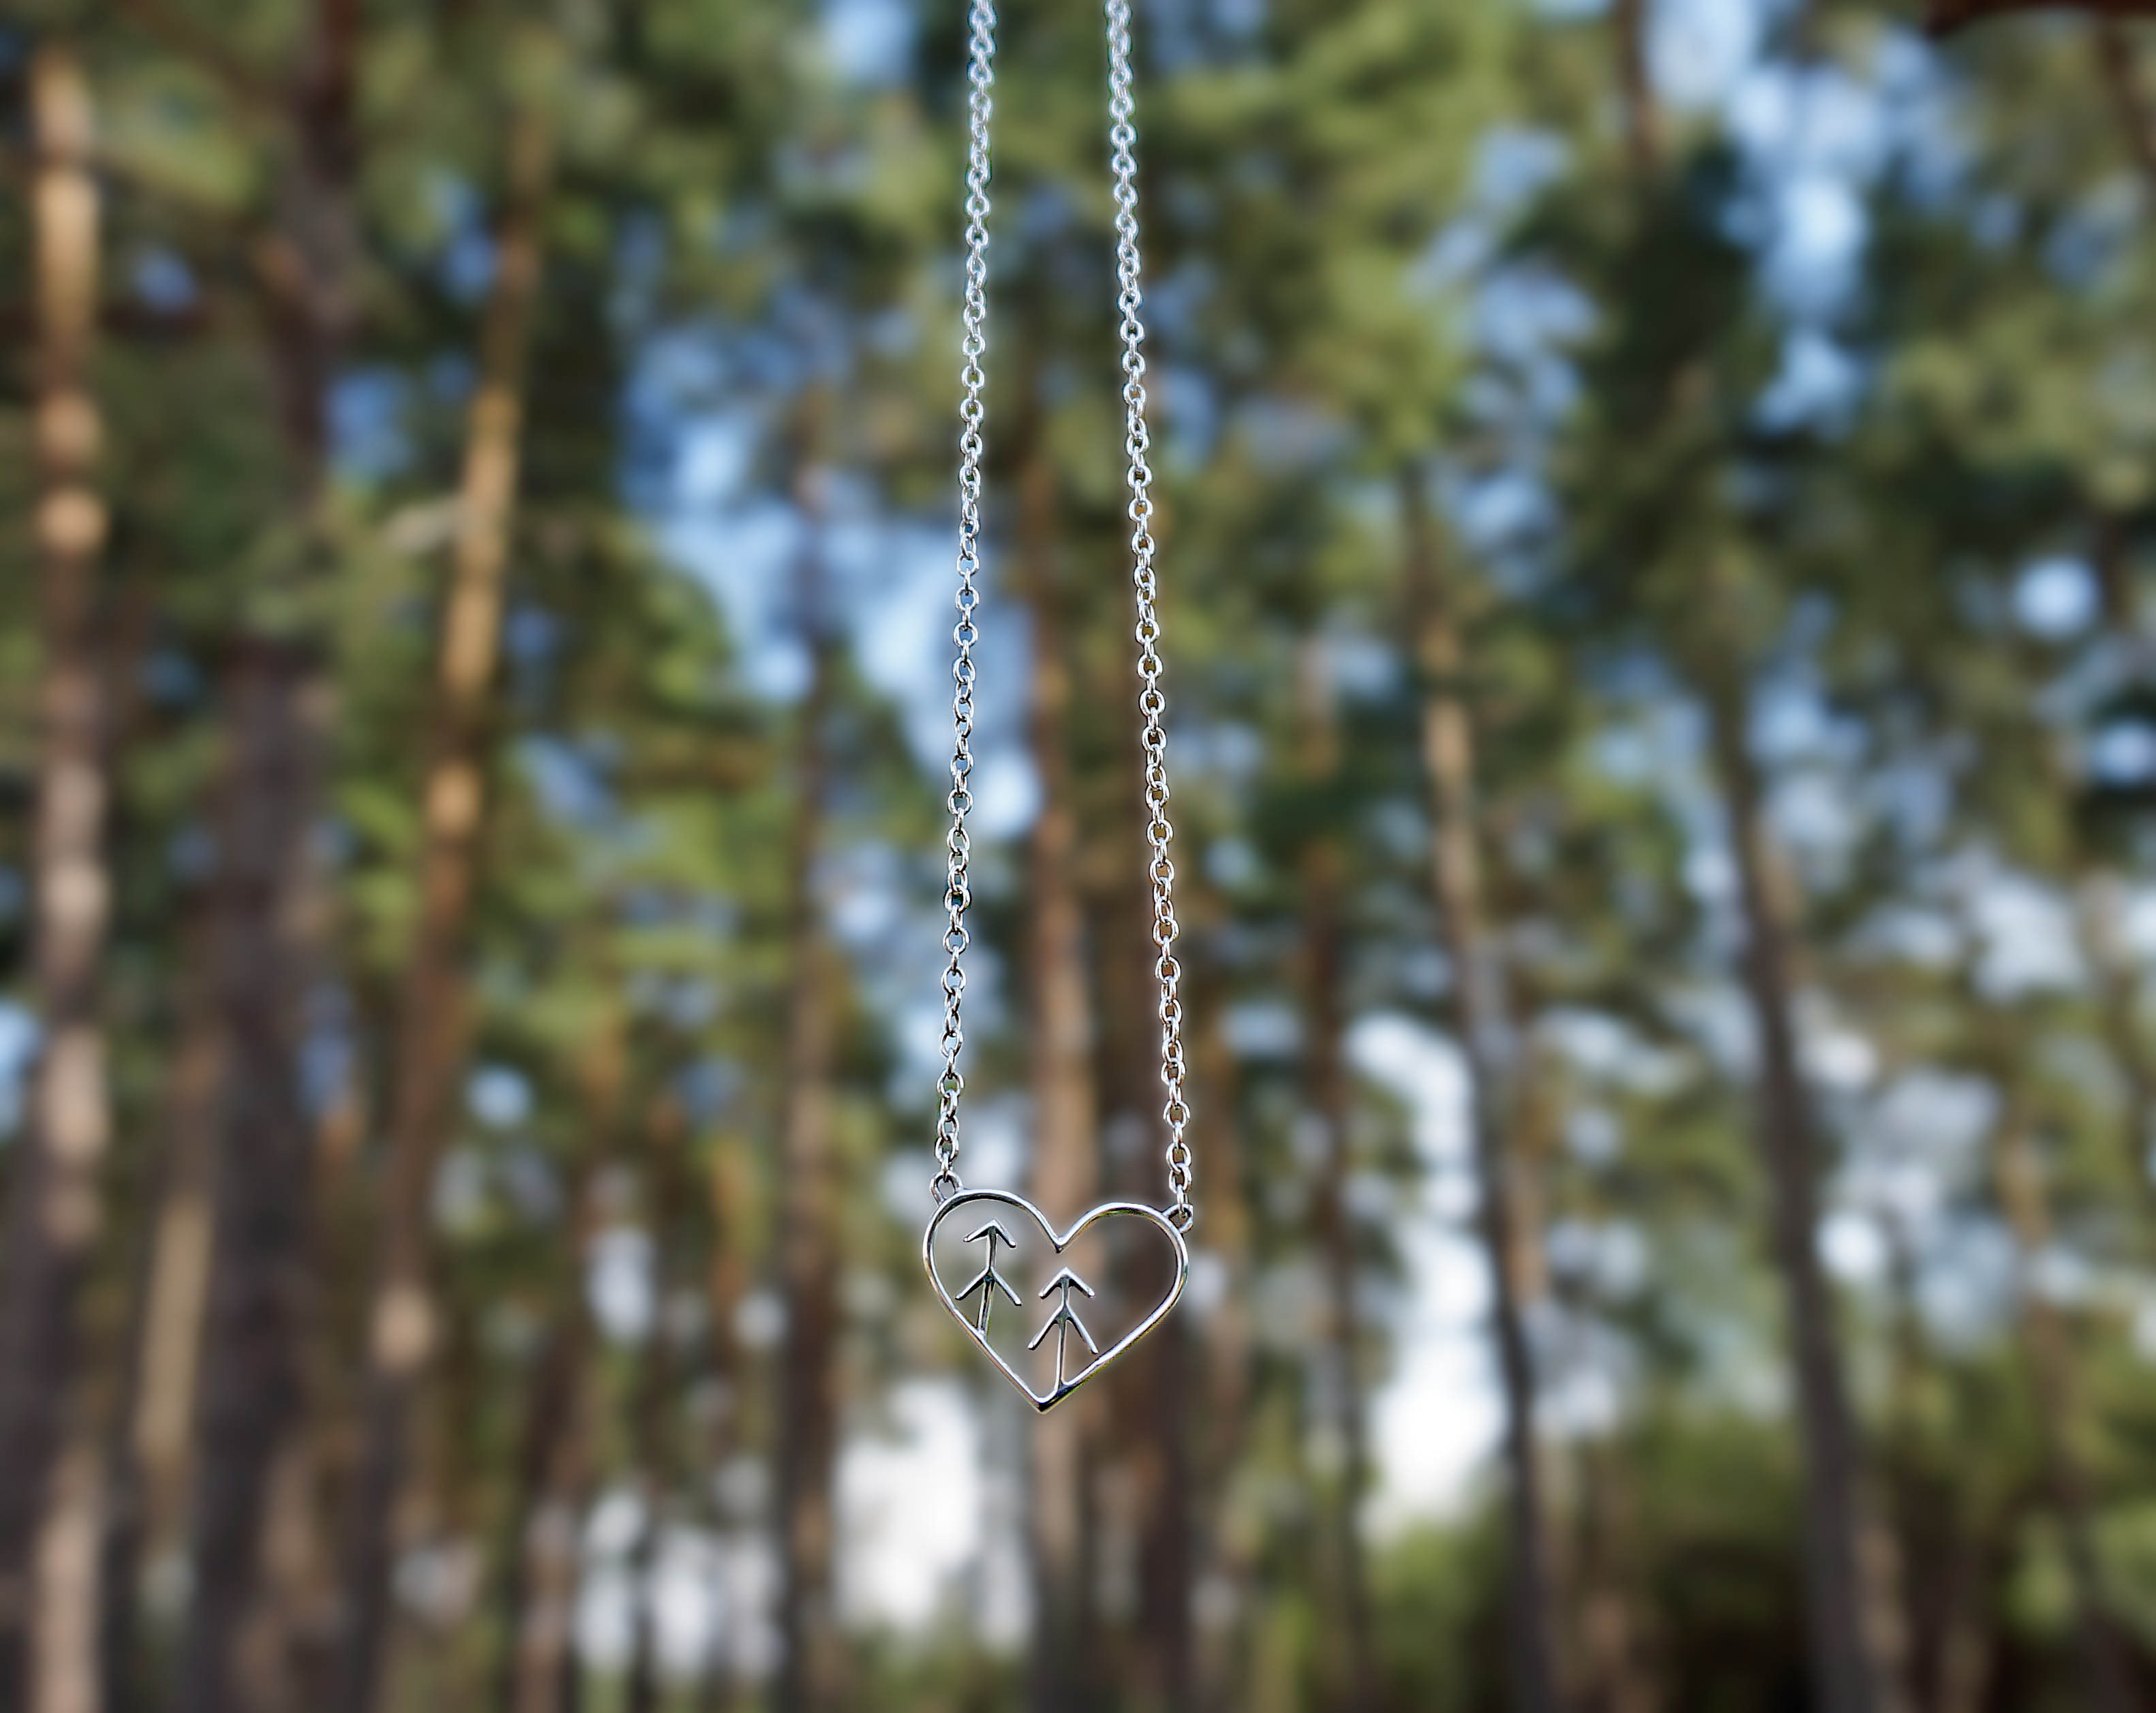 Love the forest tree heart necklace